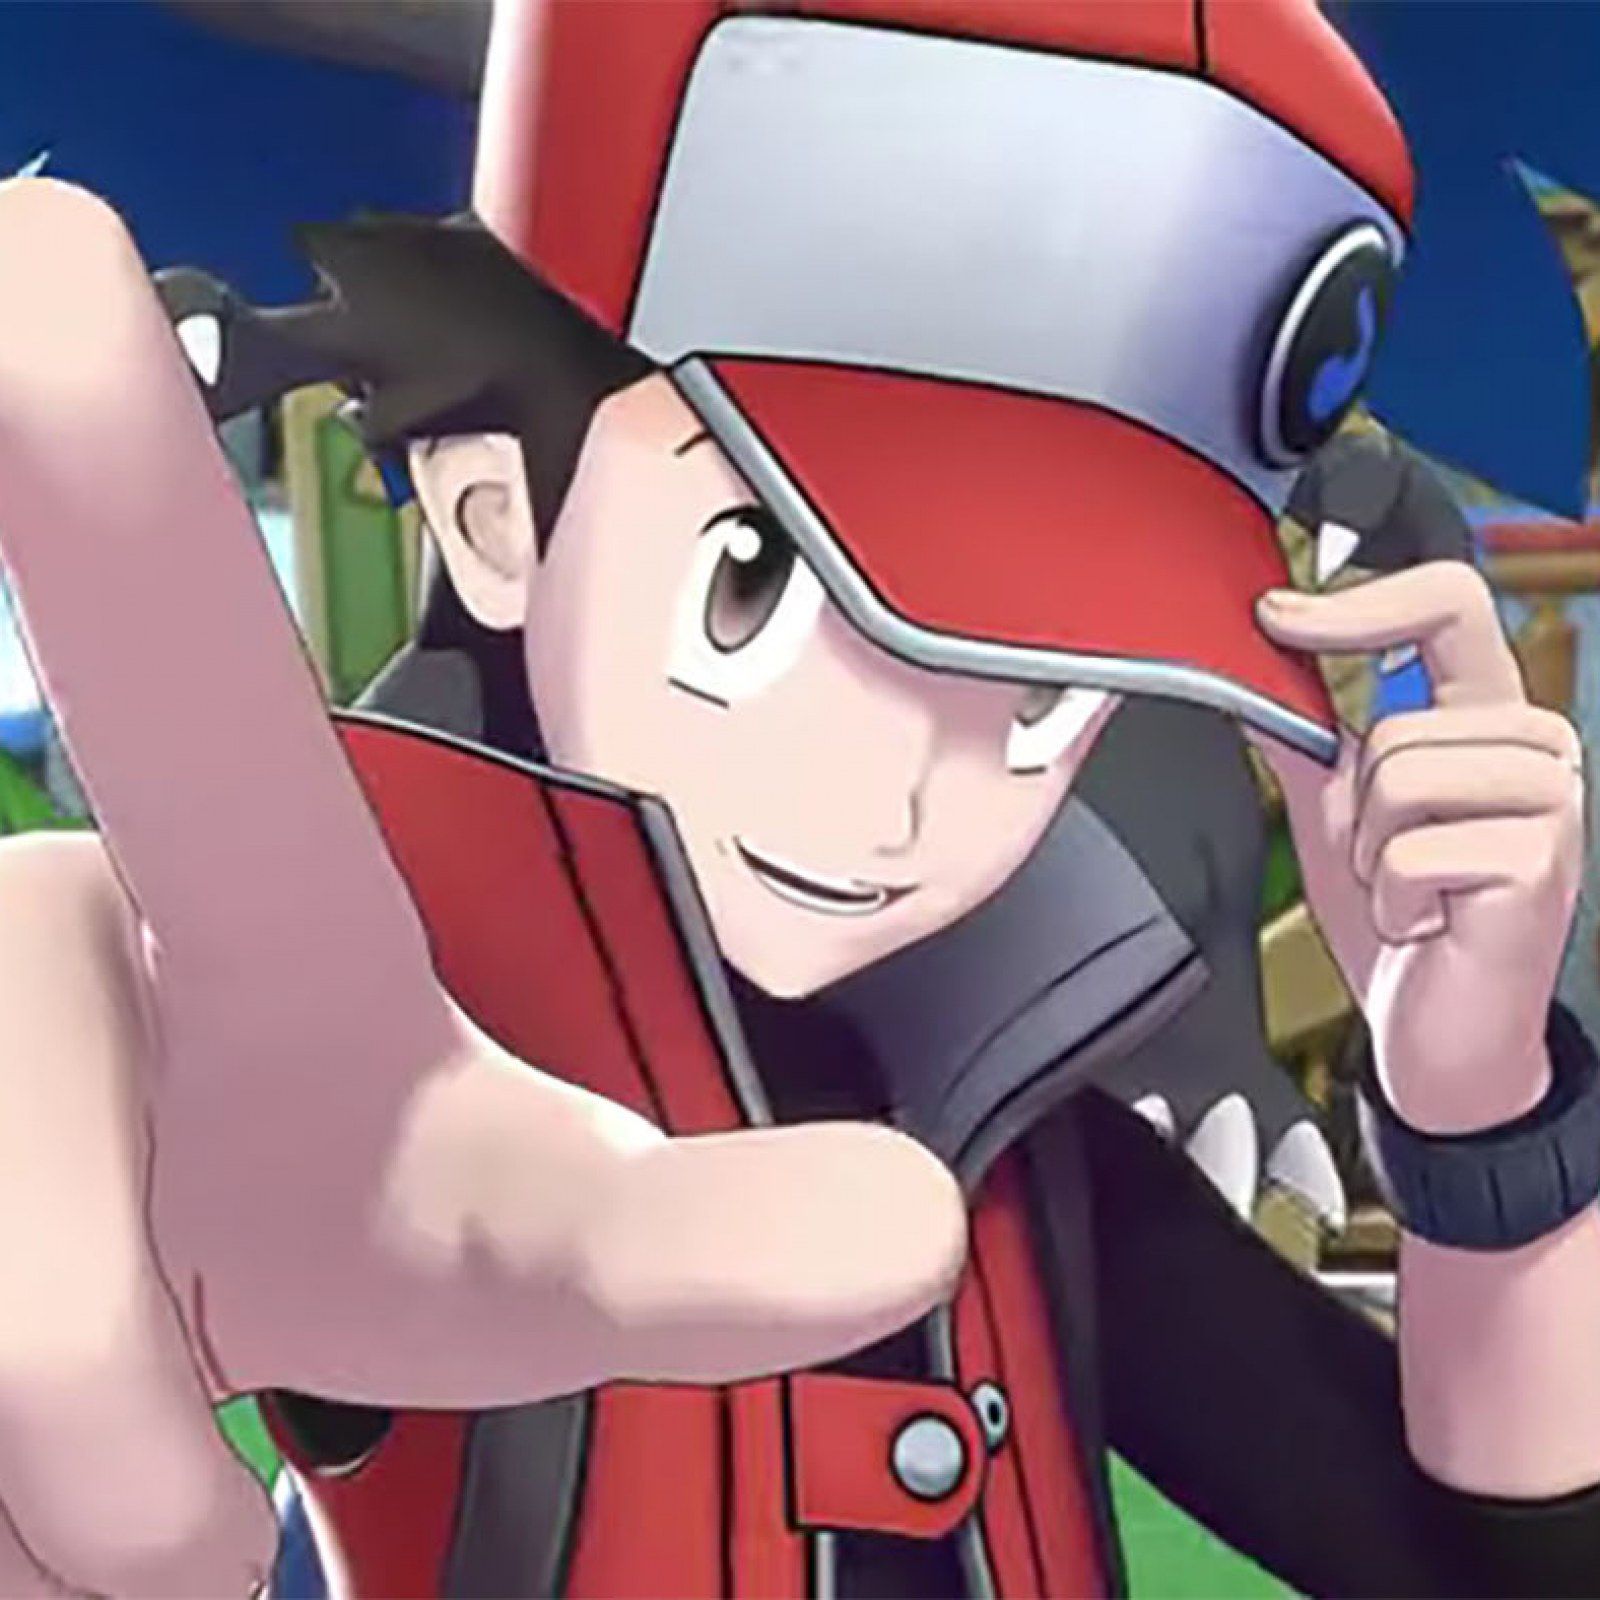 Pokémon Masters' Update to Add Red and Charizard, Battle Villa & More